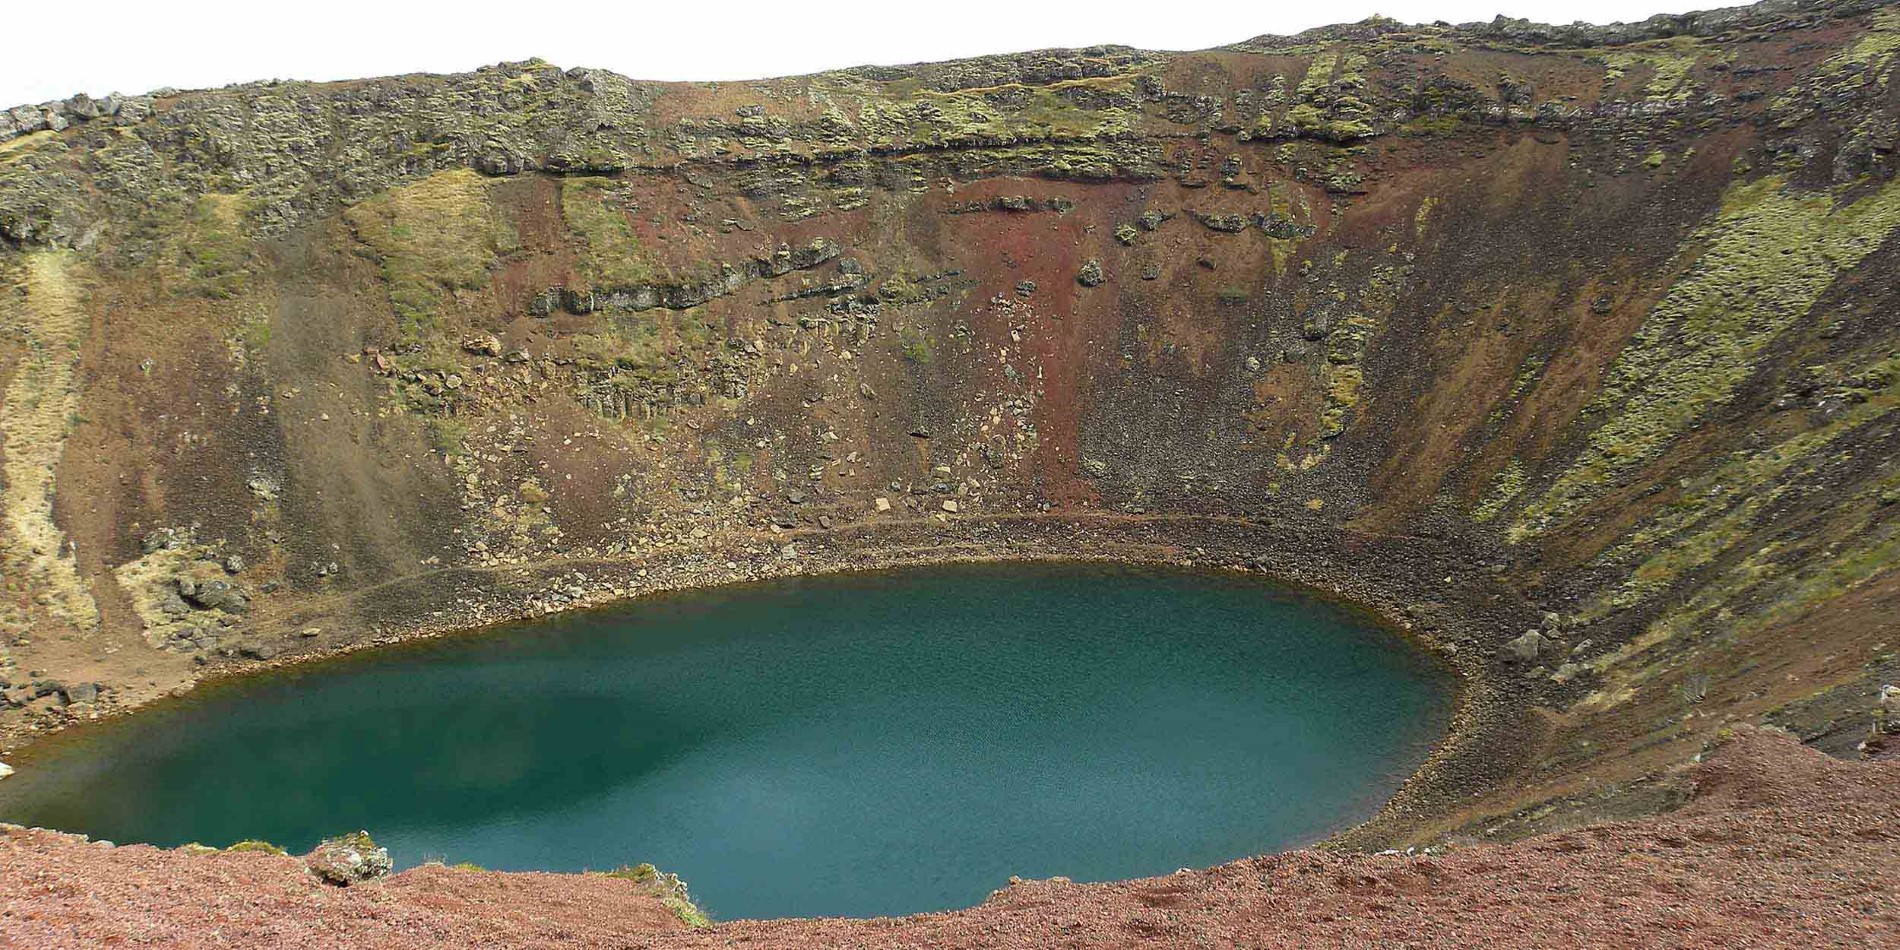 Water next to the rock with Big Hole in the background